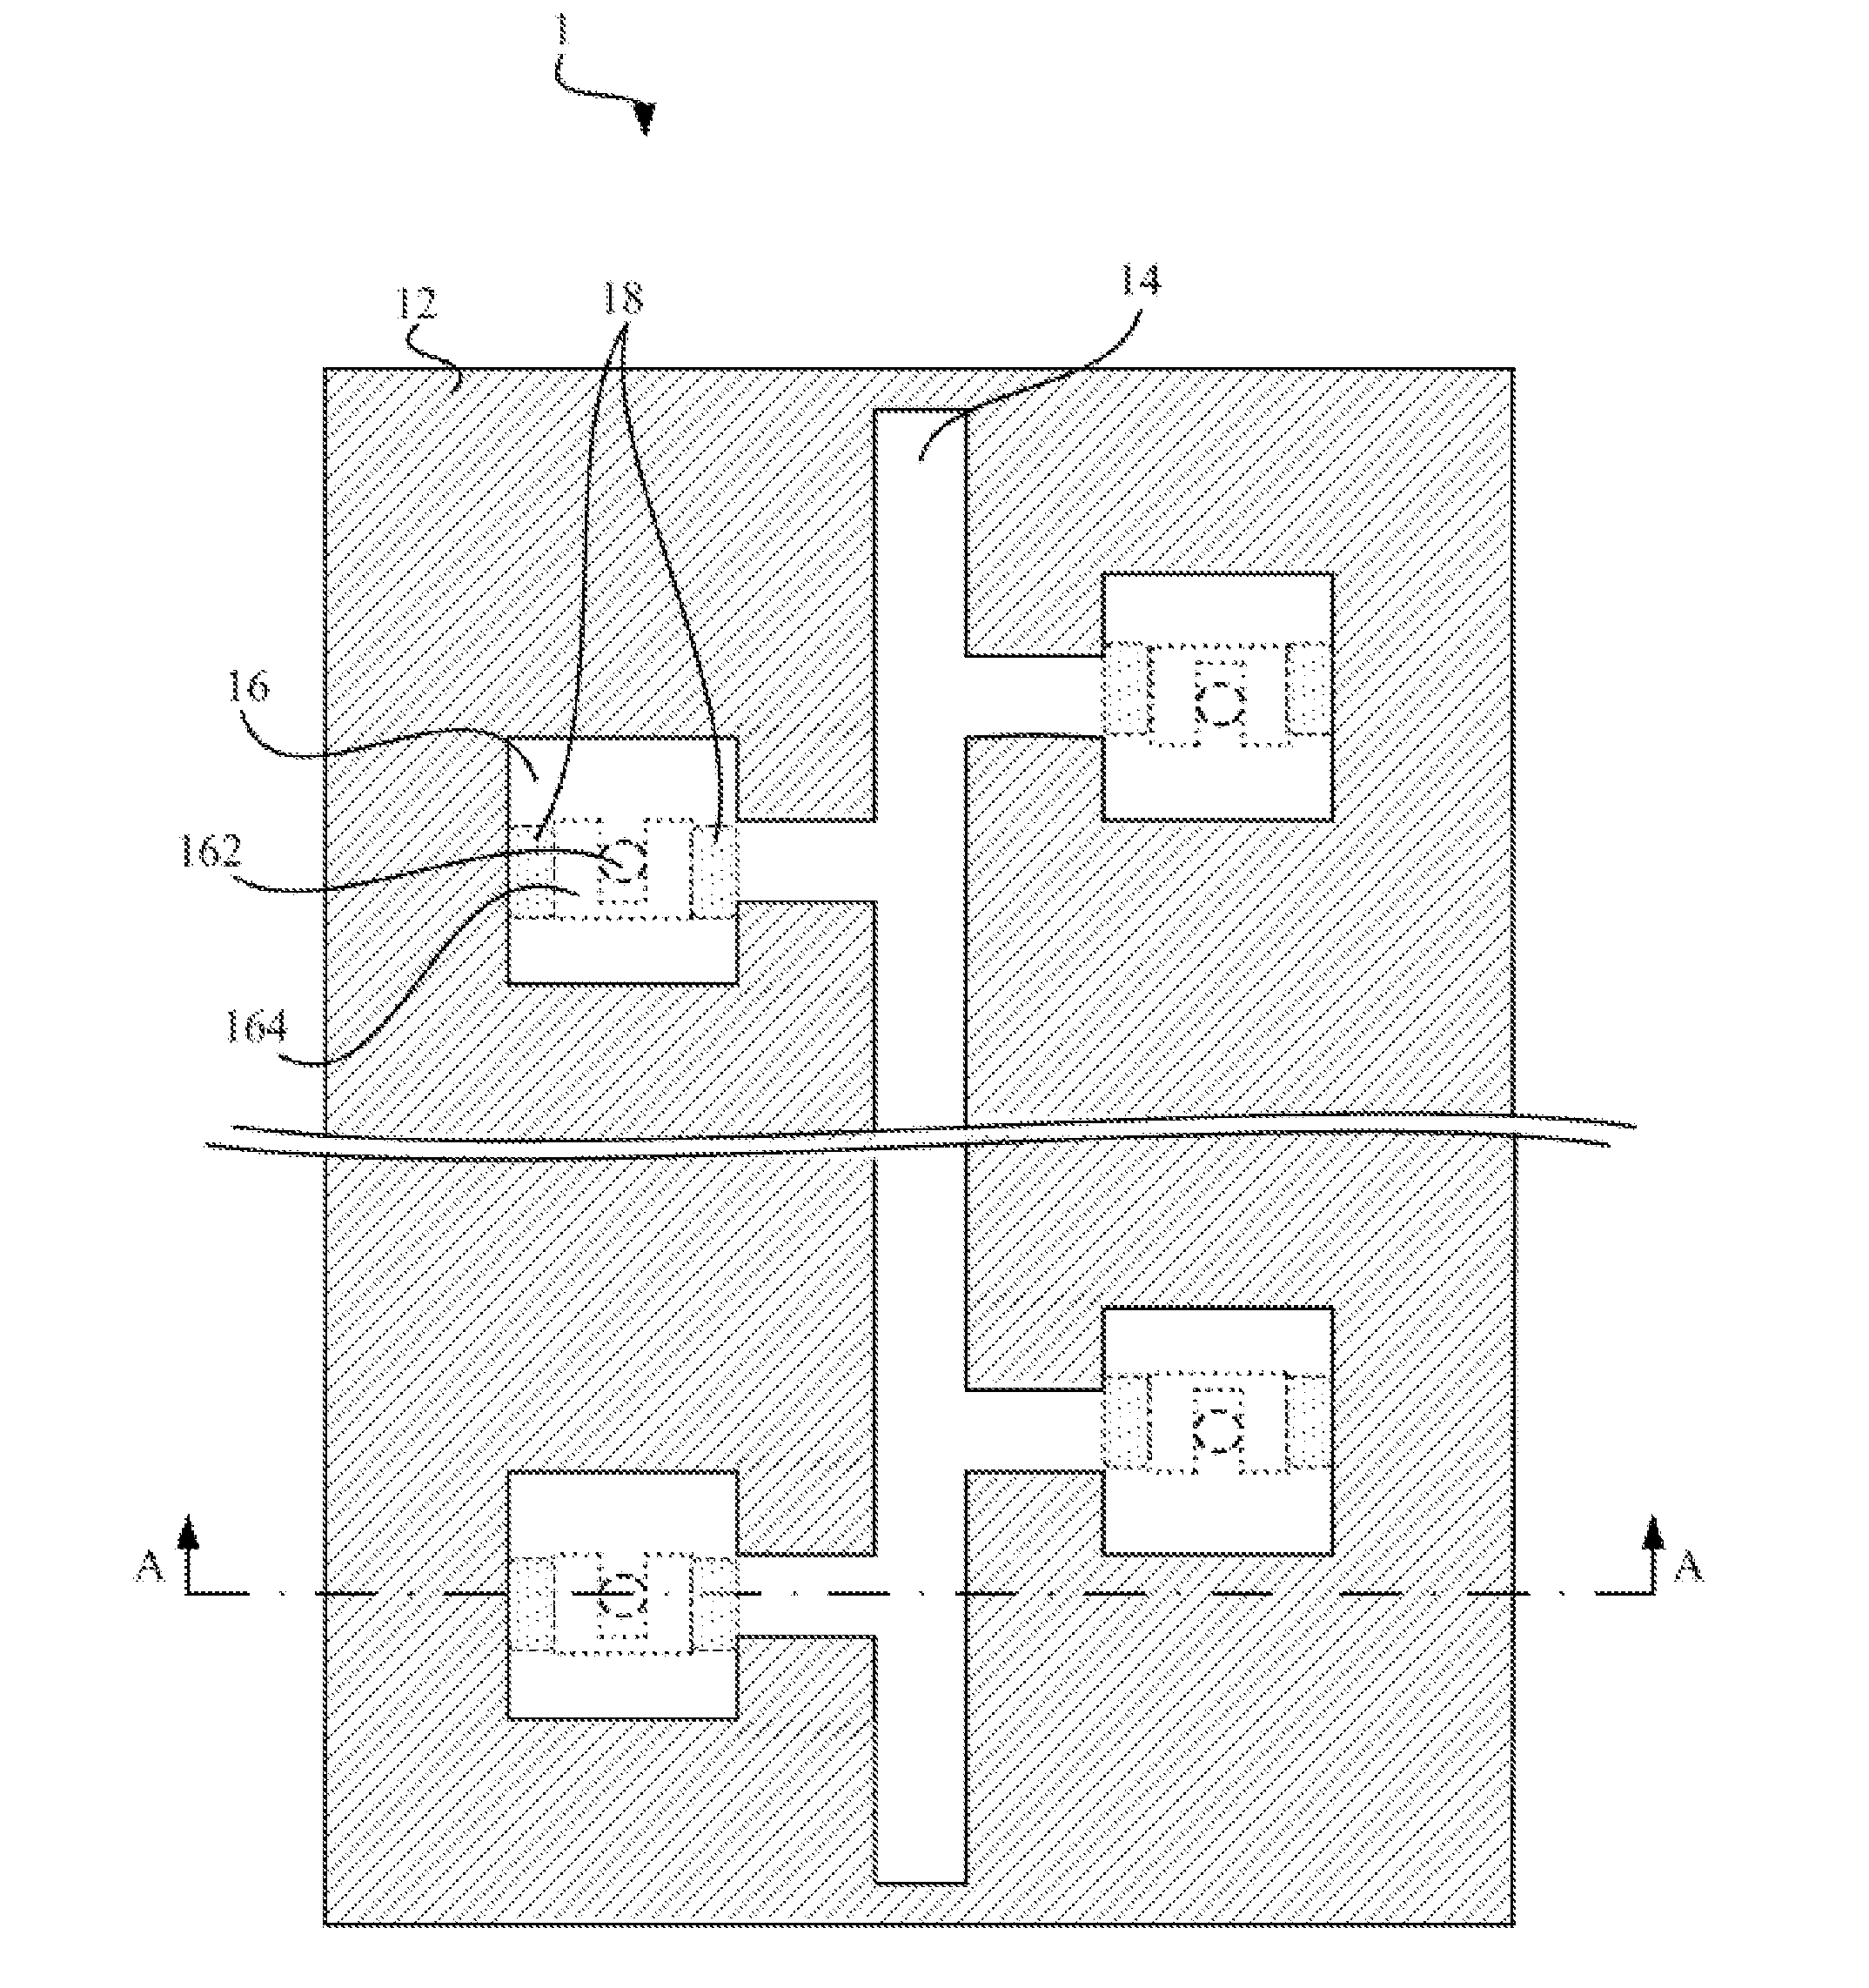 Microinjection apparatus with thermochromic indicator